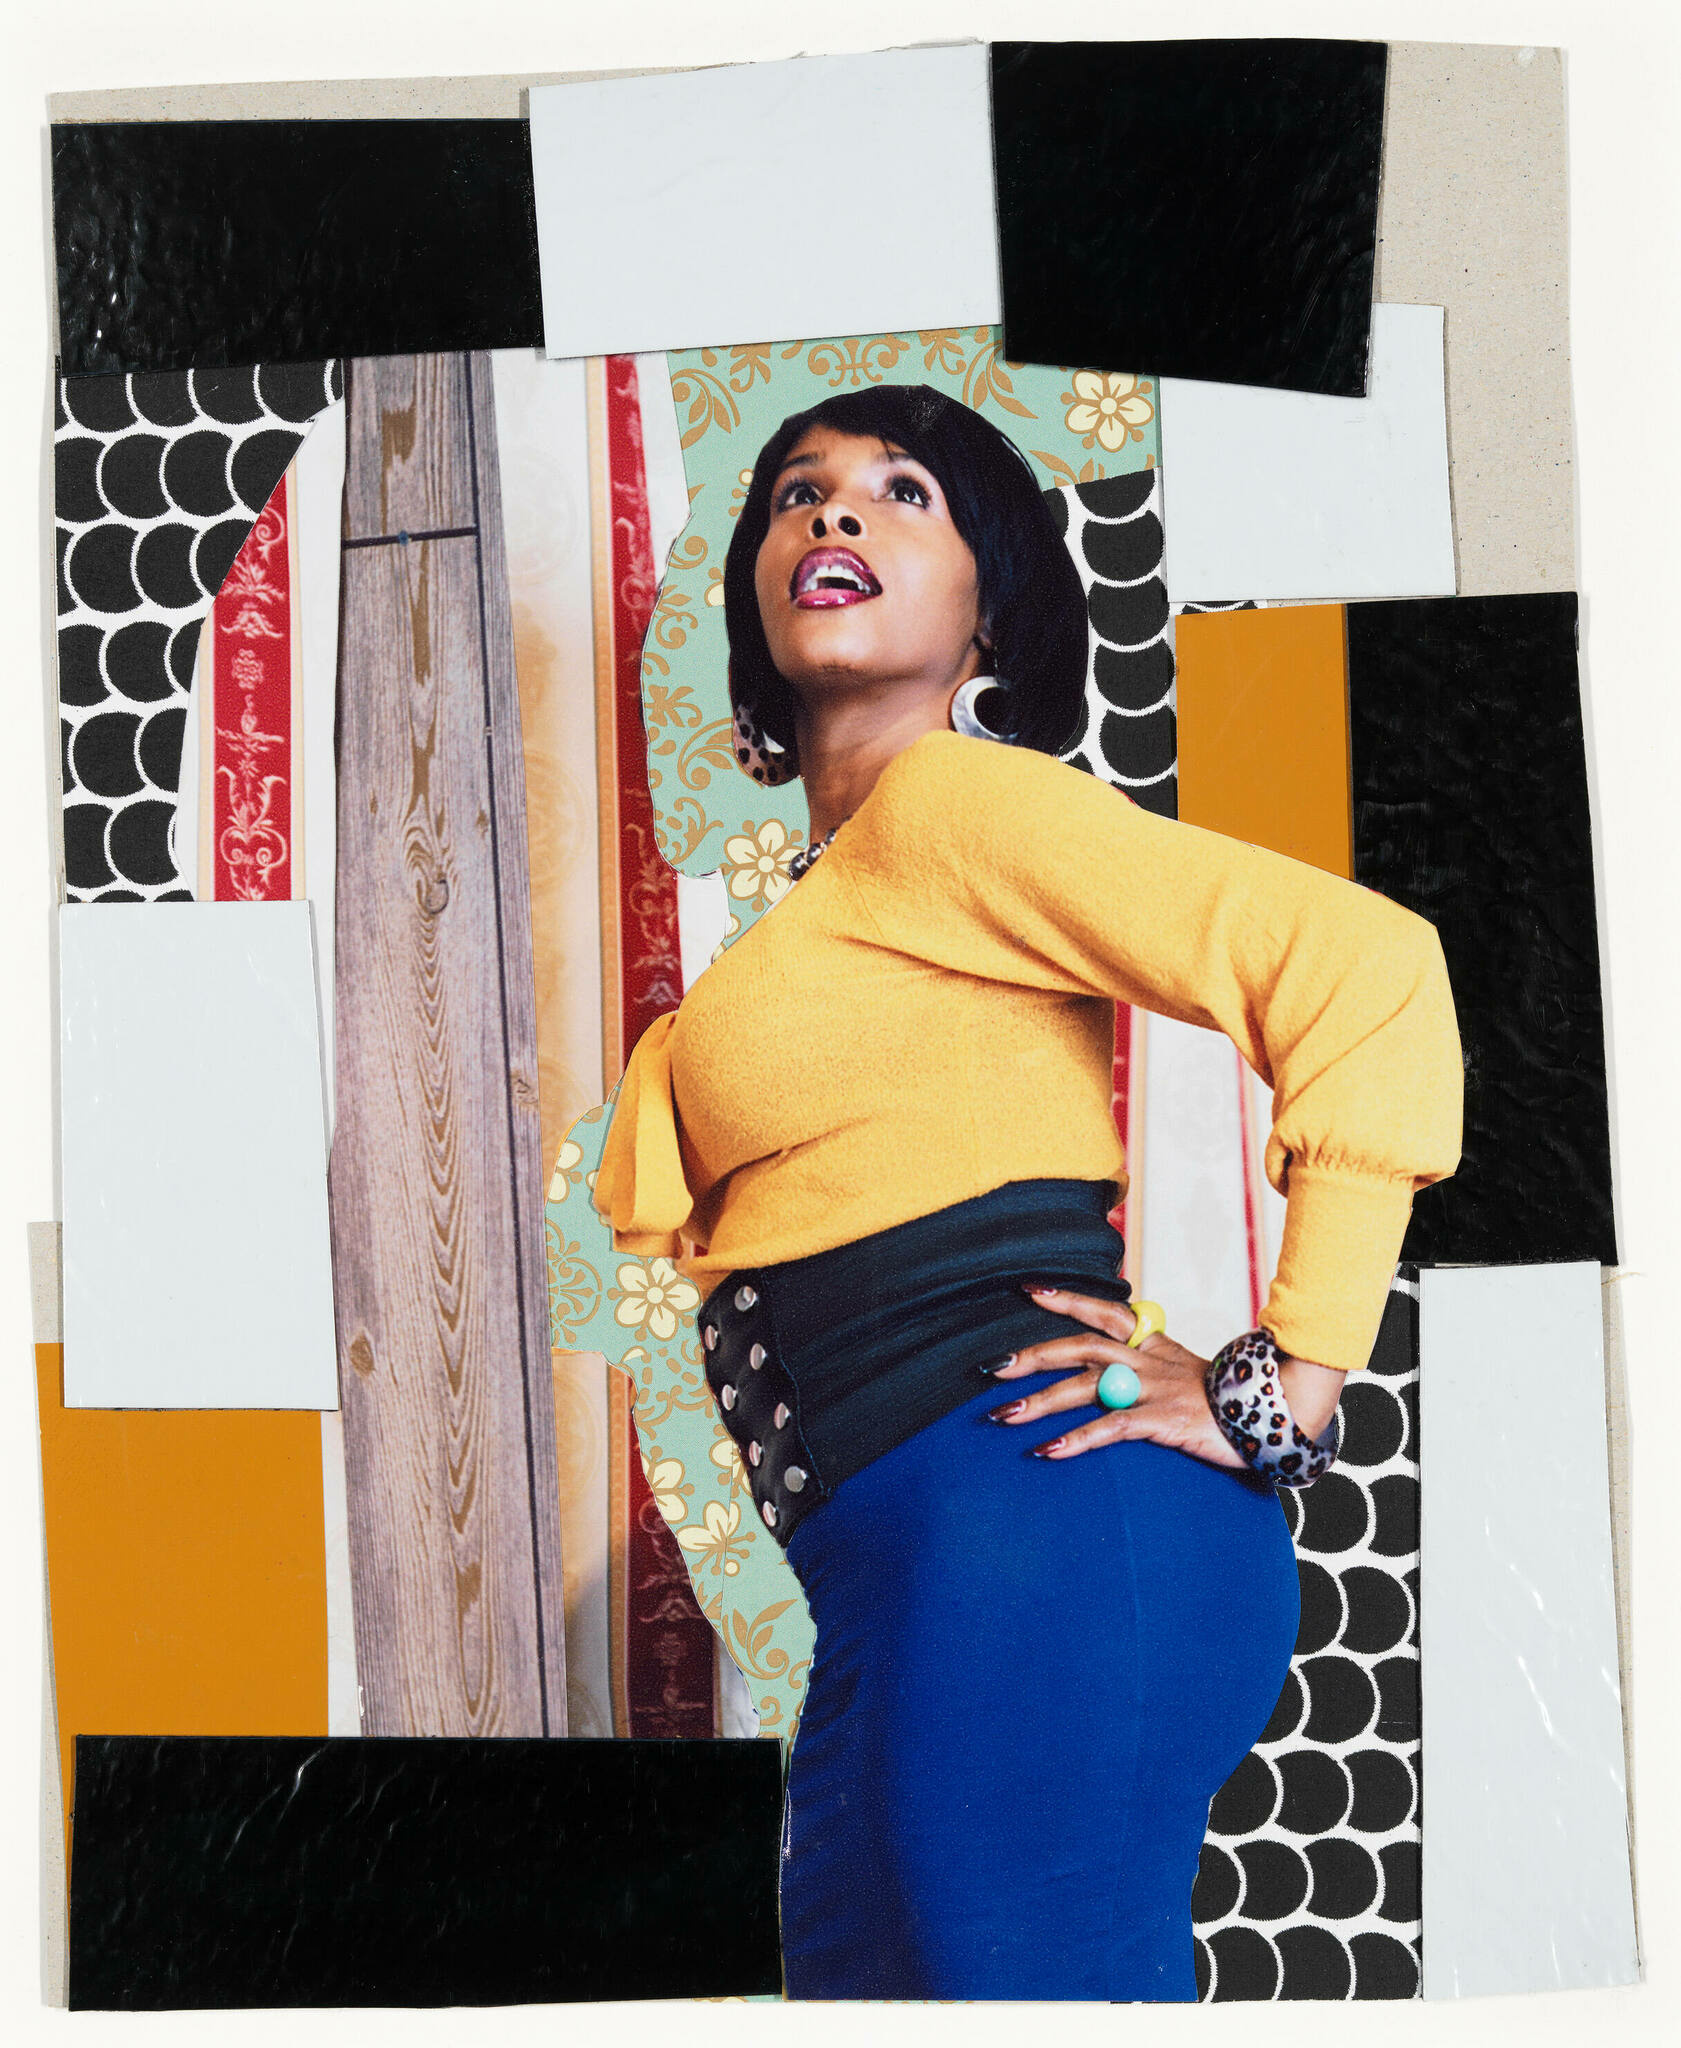 A photo of a Black woman centered on top of various forms of printed and solid collaged paper.